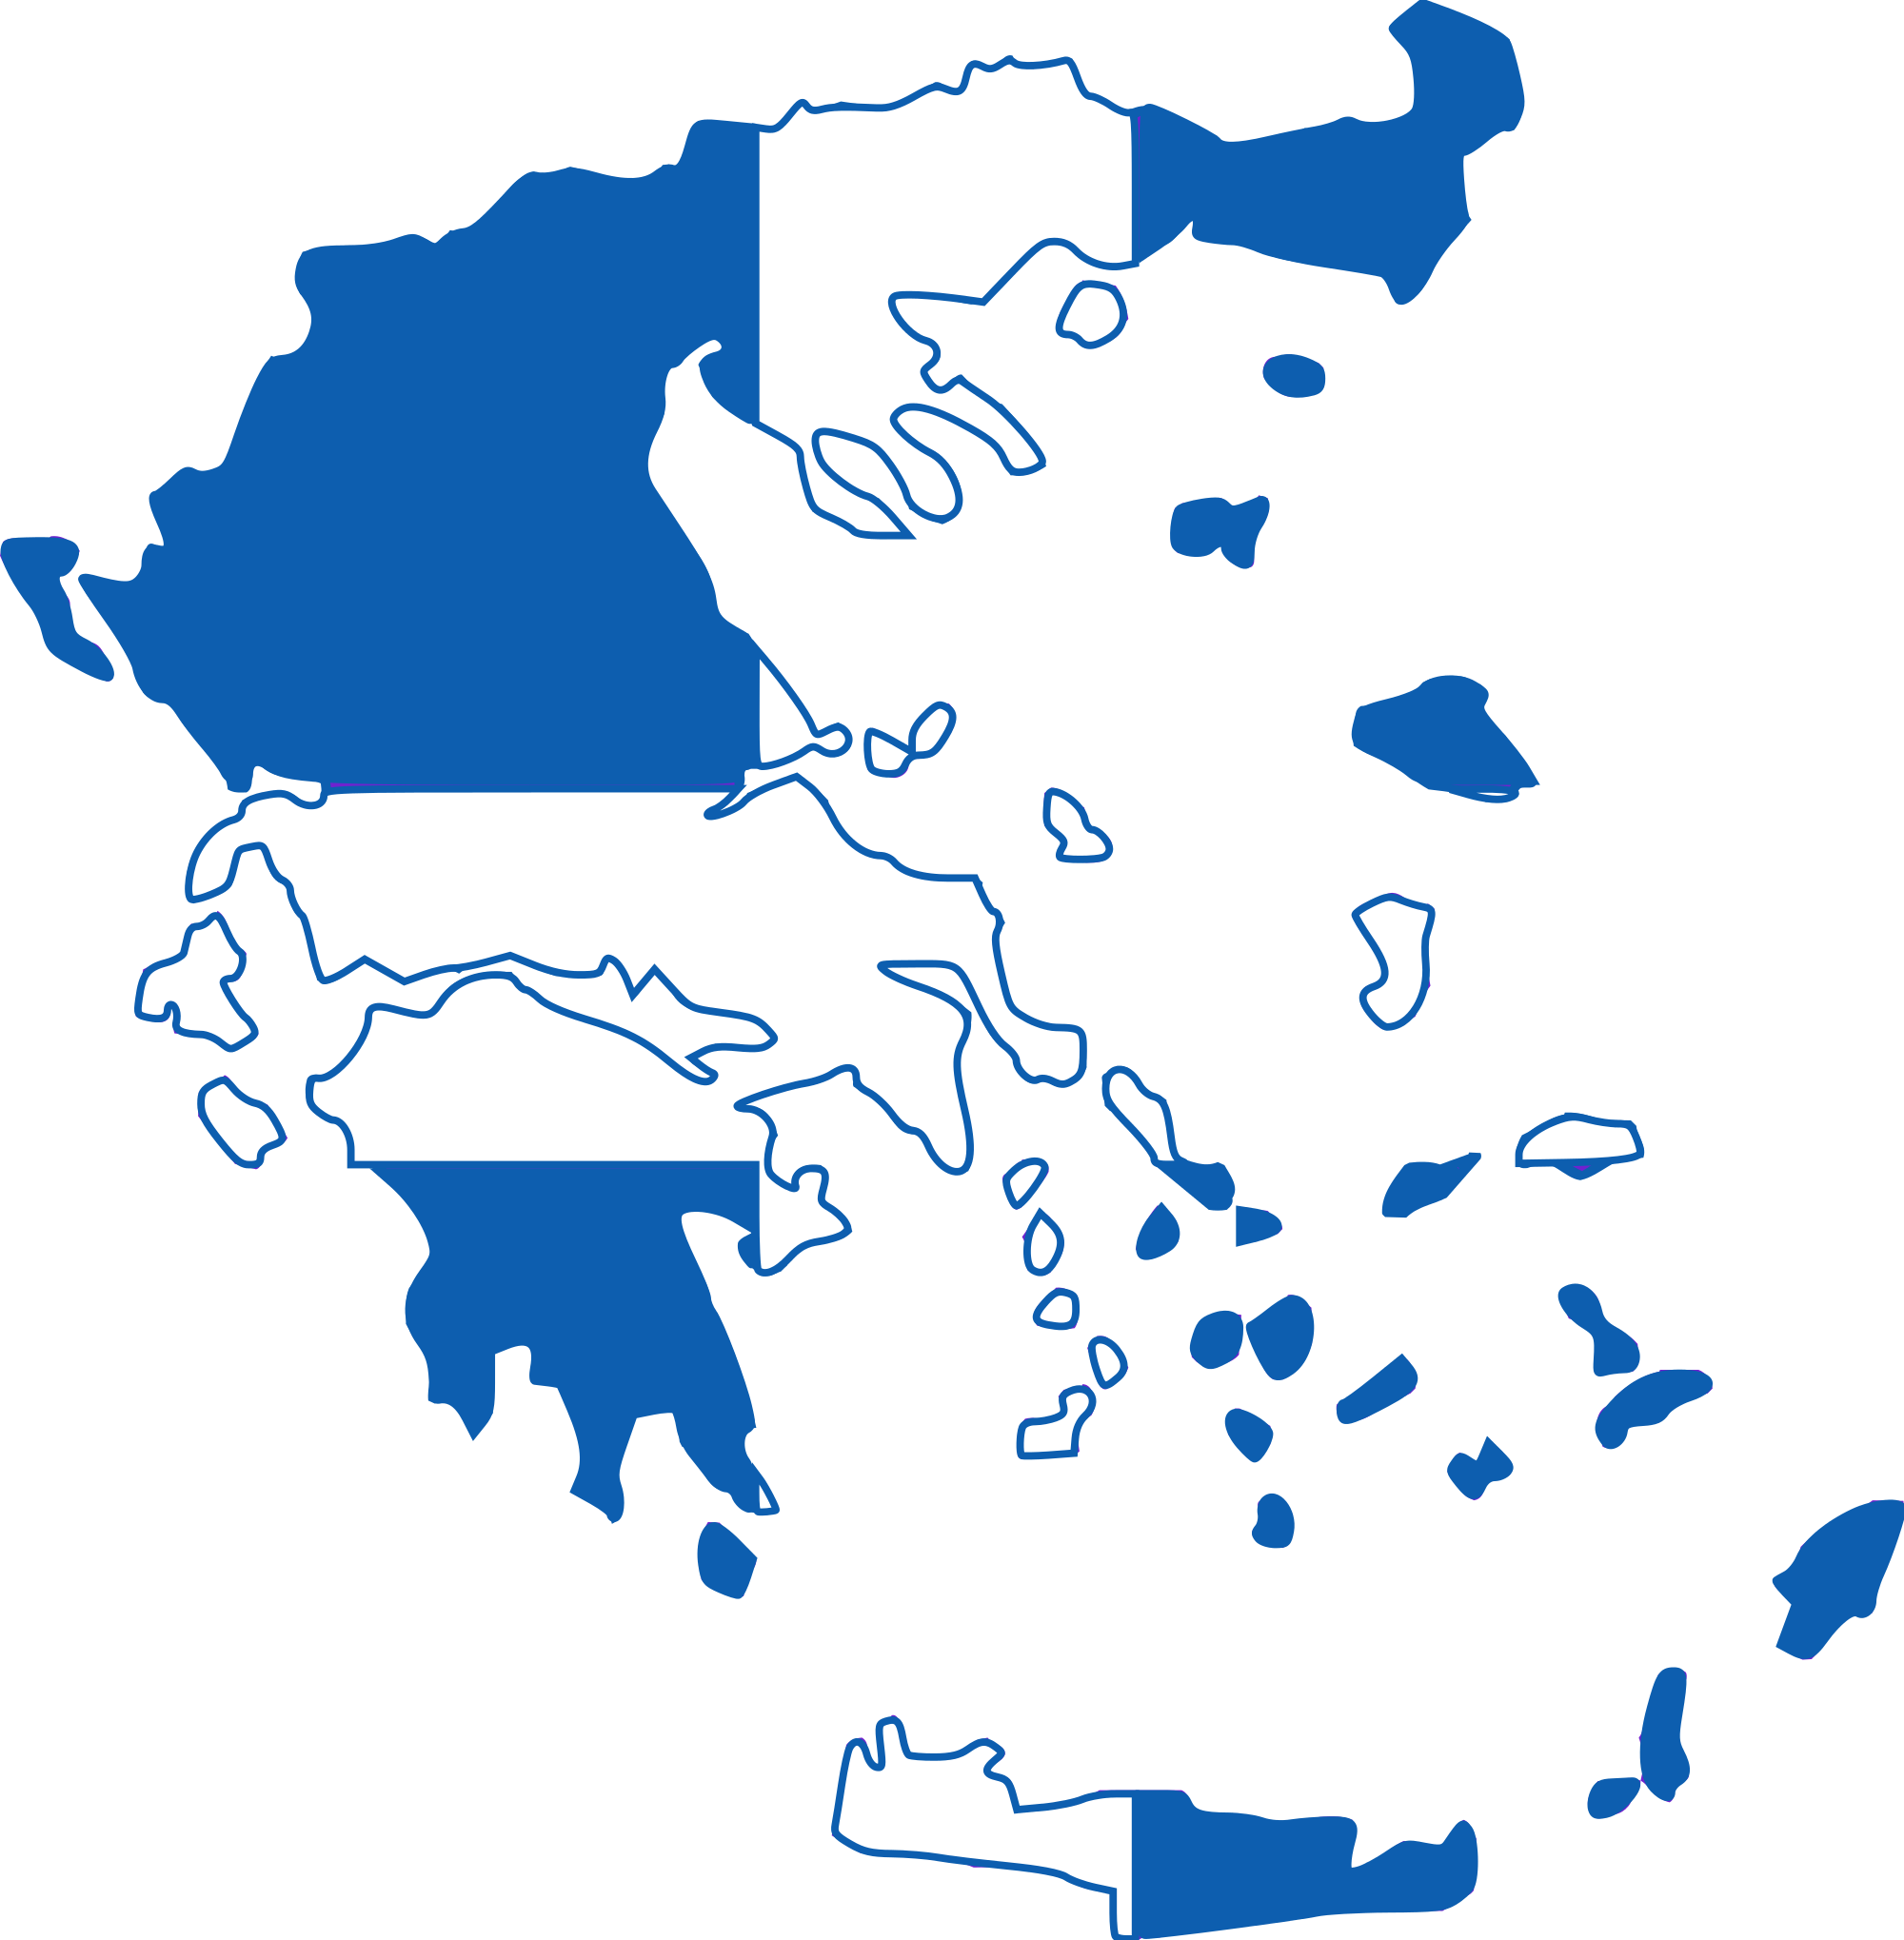 Blue Map Photos Greece HD Image Free PNG Image